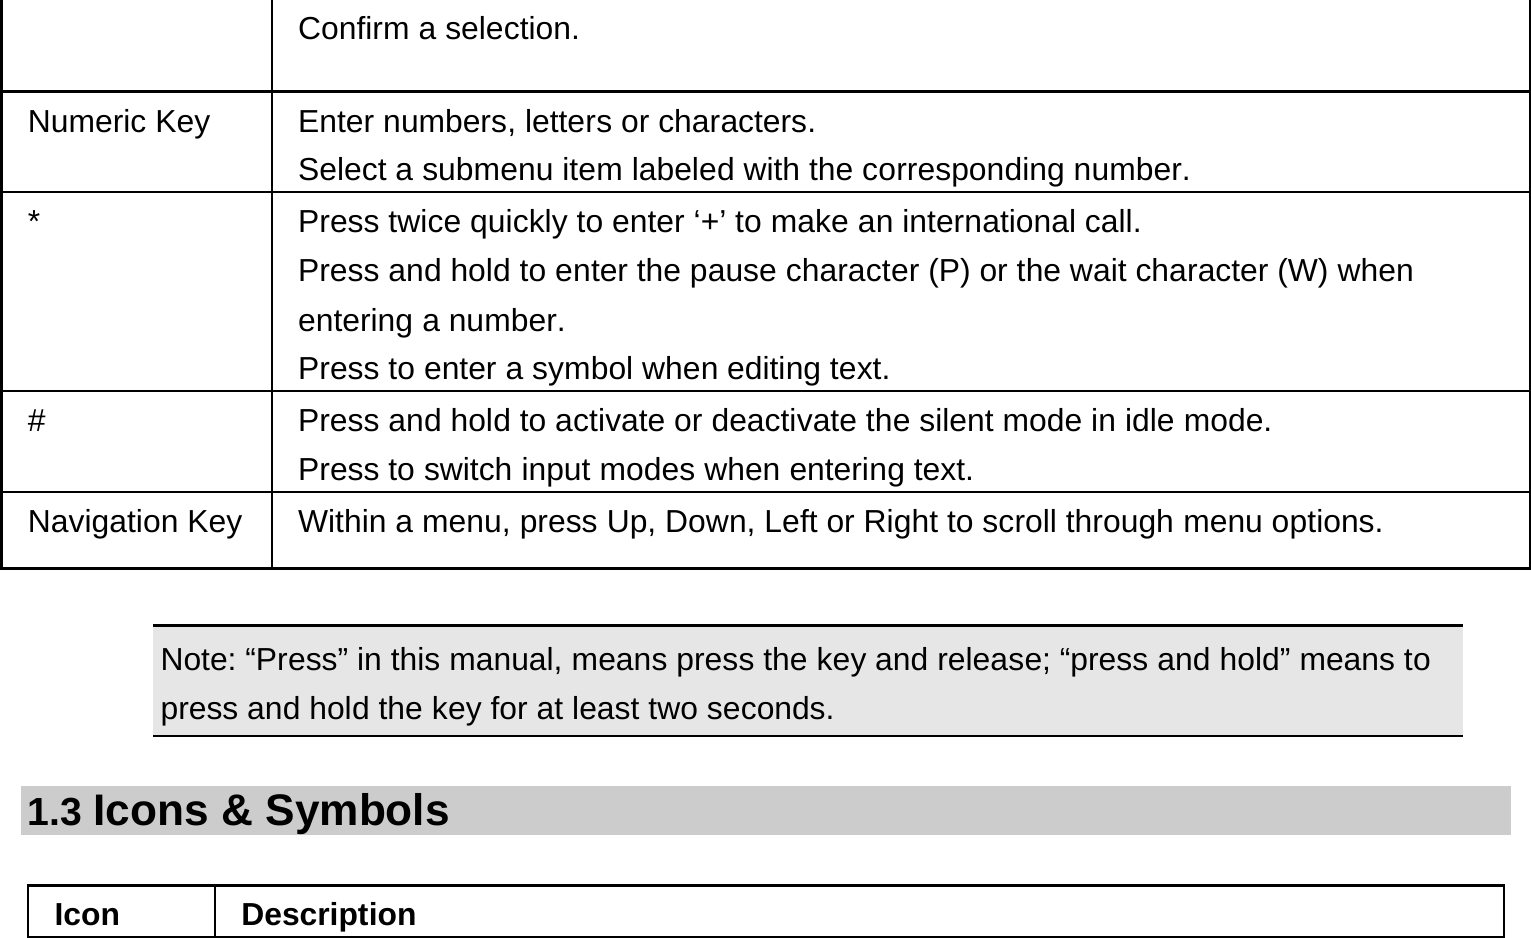  Confirm a selection. Numeric Key  Enter numbers, letters or characters.   Select a submenu item labeled with the corresponding number.   *  Press twice quickly to enter ‘+’ to make an international call.   Press and hold to enter the pause character (P) or the wait character (W) when entering a number.   Press to enter a symbol when editing text. #  Press and hold to activate or deactivate the silent mode in idle mode.   Press to switch input modes when entering text. Navigation Key Within a menu, press Up, Down, Left or Right to scroll through menu options.    Note: “Press” in this manual, means press the key and release; “press and hold” means to press and hold the key for at least two seconds.  1.3 Icons &amp; Symbols  Icon Description 